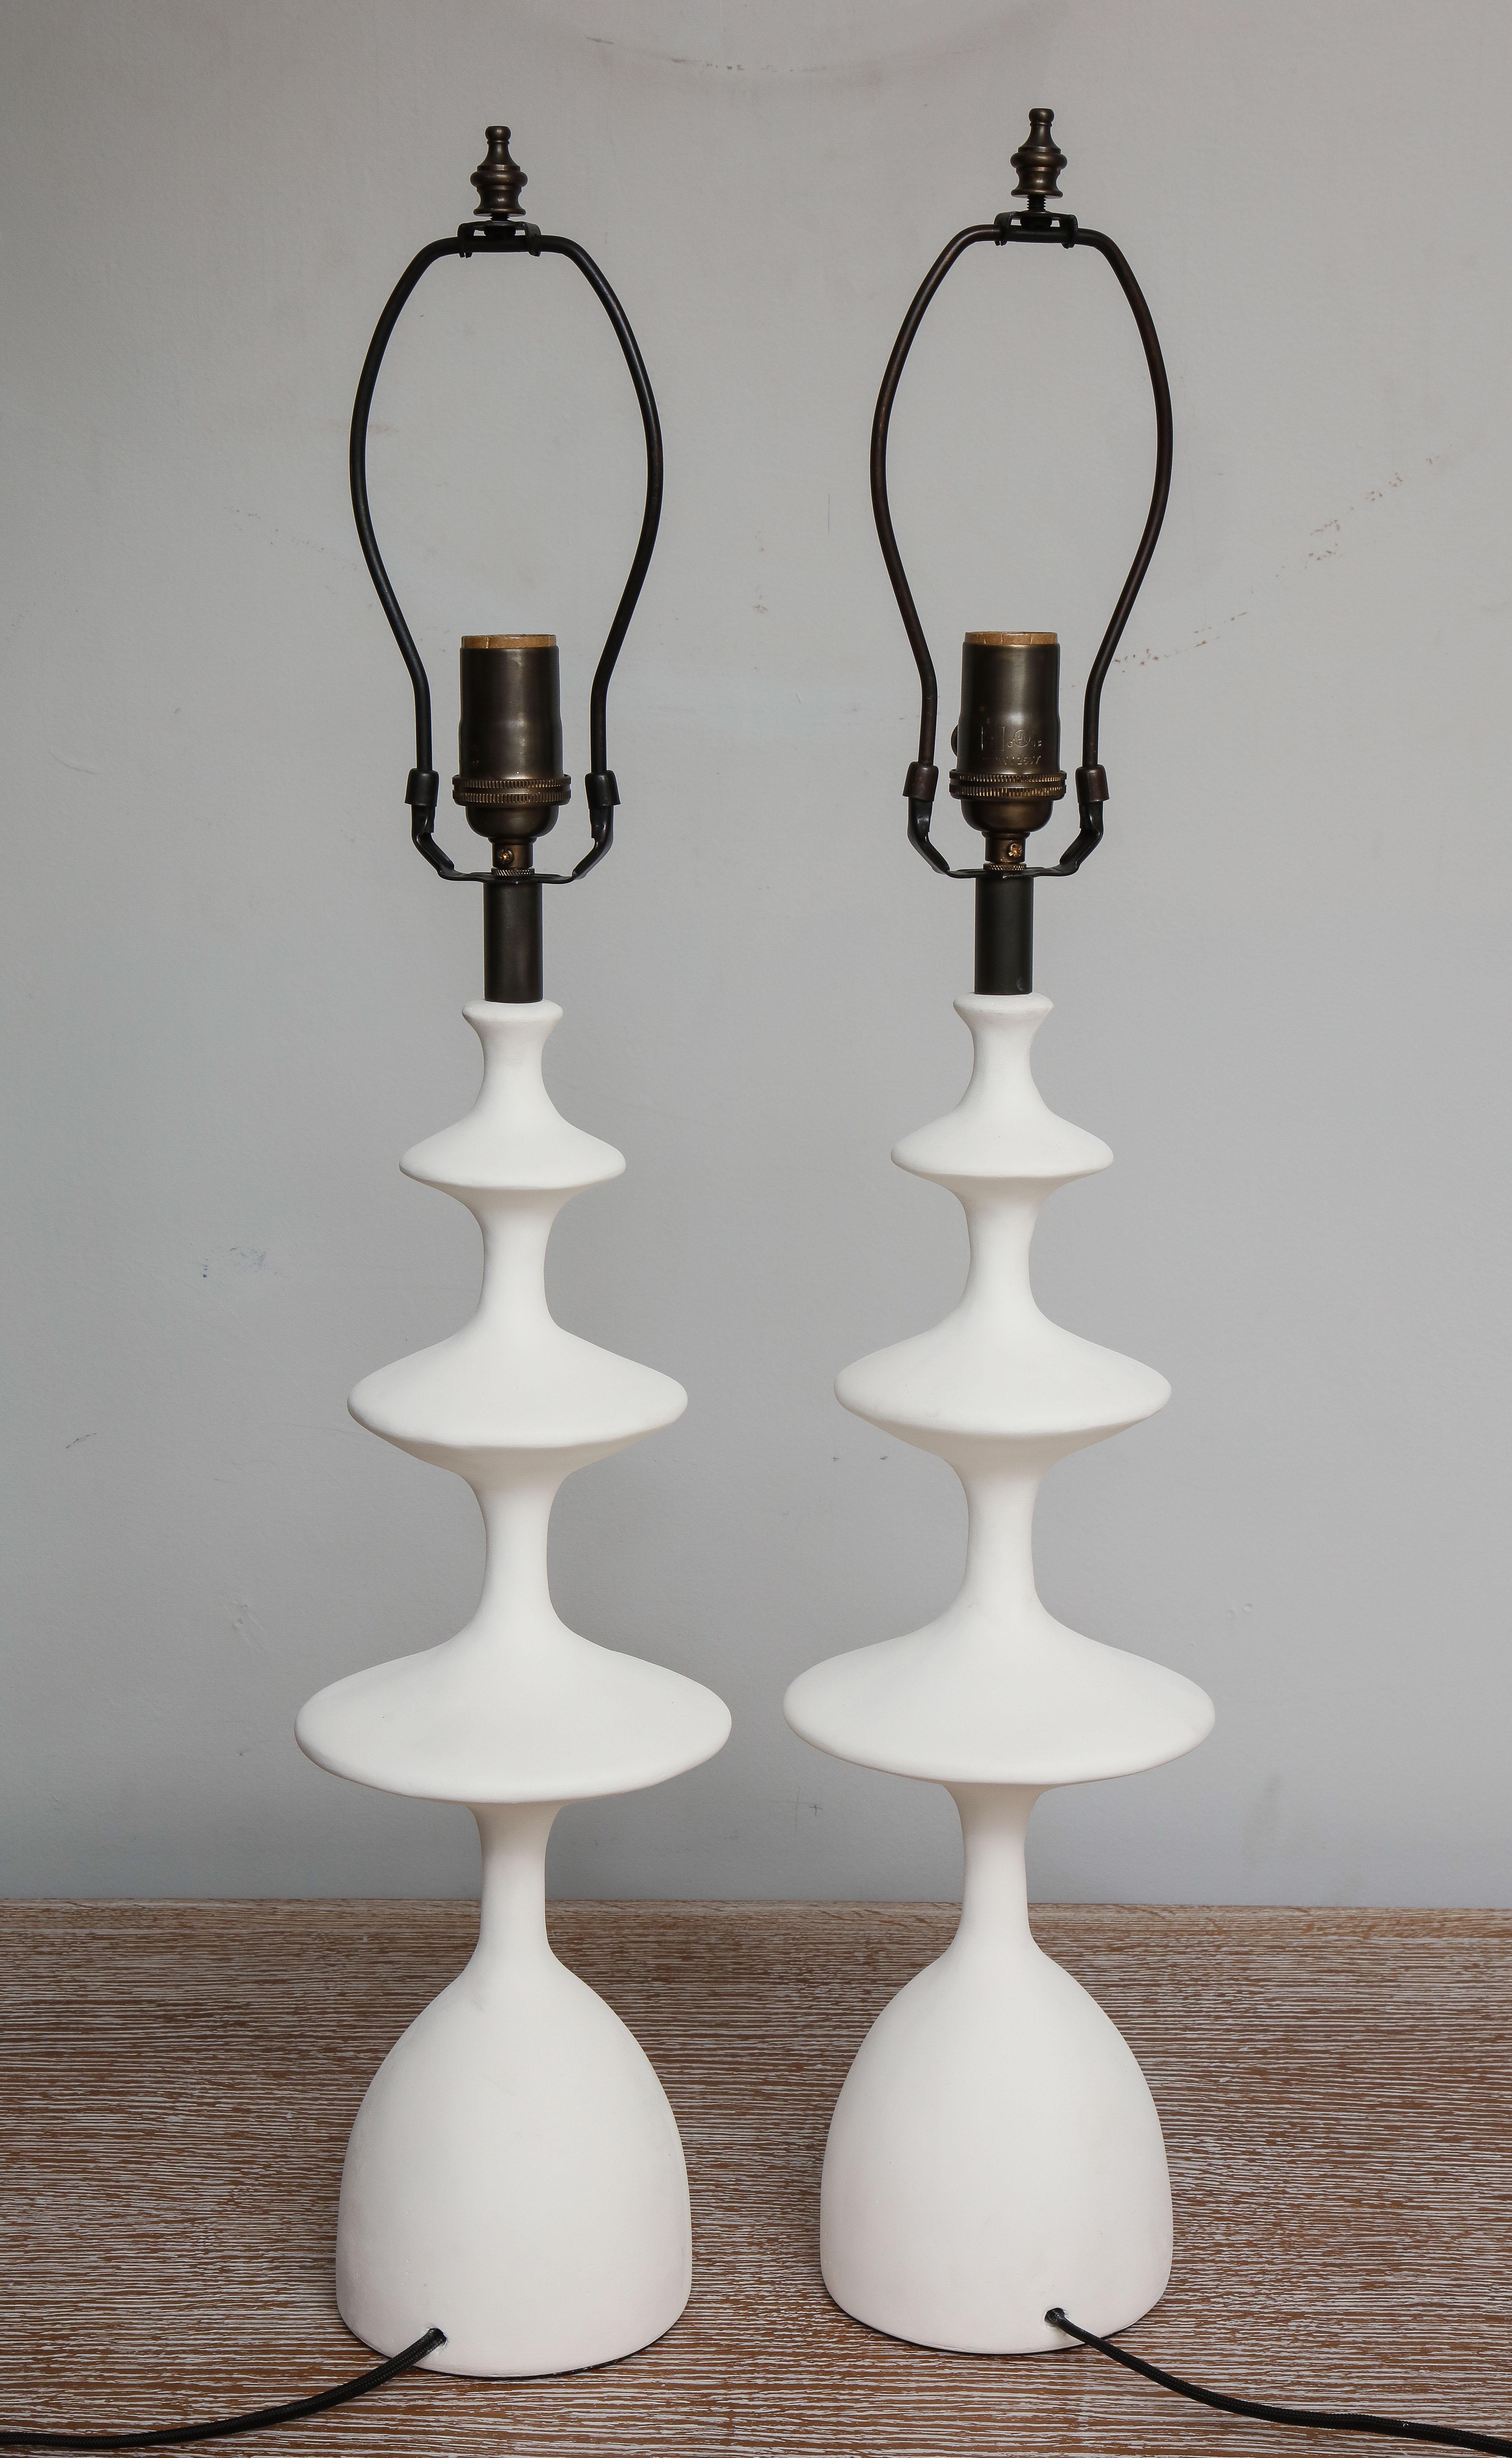 Pair of sculptural custom plaster table lamps. Priced at set of 2.
The lamp shades are not included.
Please note that these lamps are customizable.
The lead time is between 8-10  weeks.